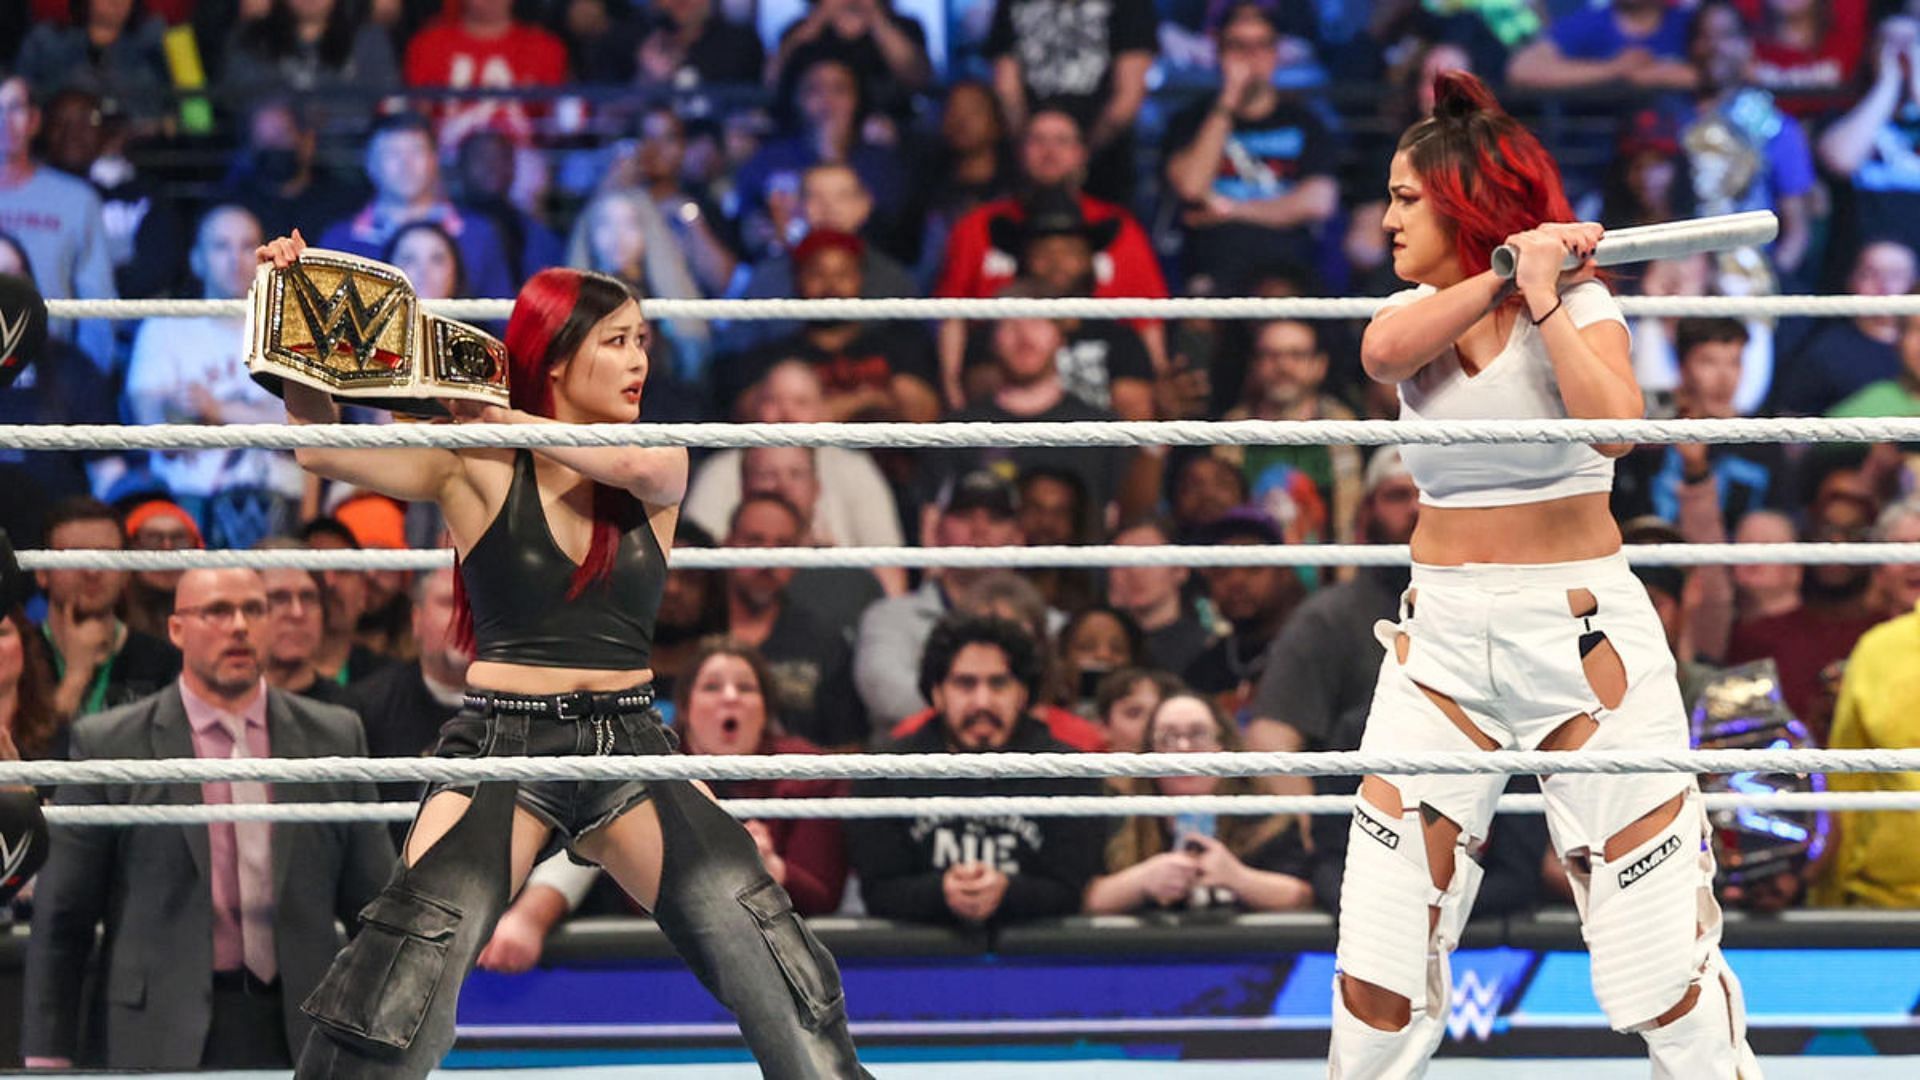 IYO SKY face-to-face with Bayley on WWE SmackDown